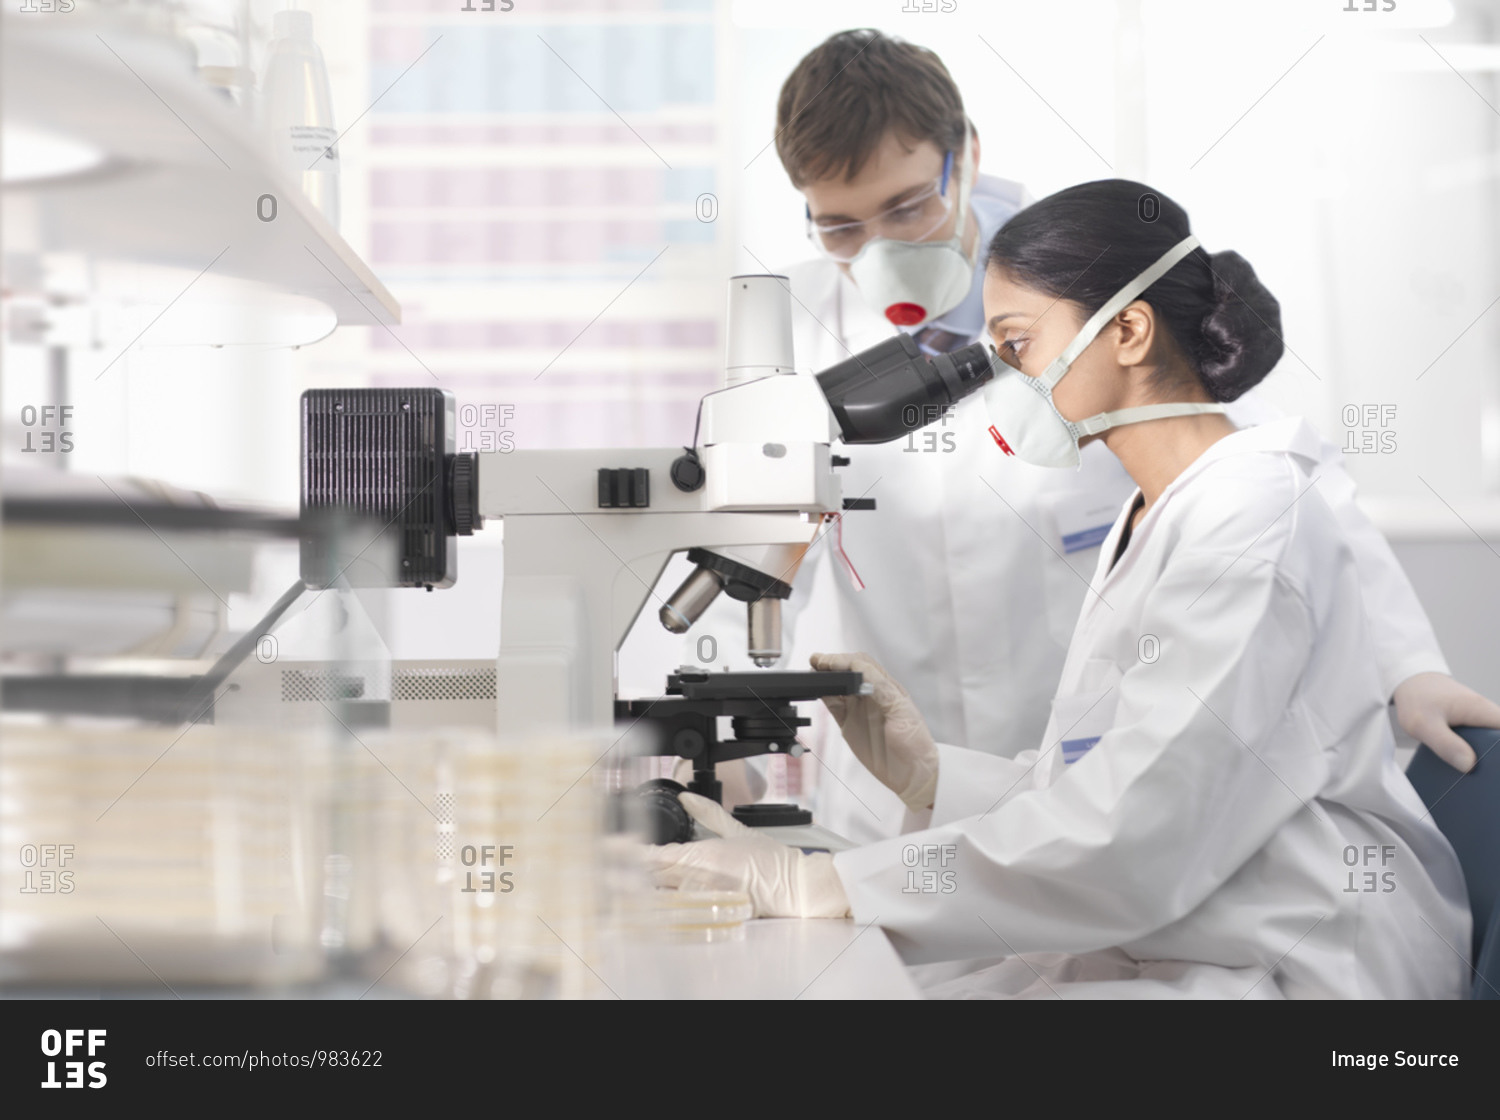 Scientists in isolation environment wearing masks, working in research laboratory, using microscope.